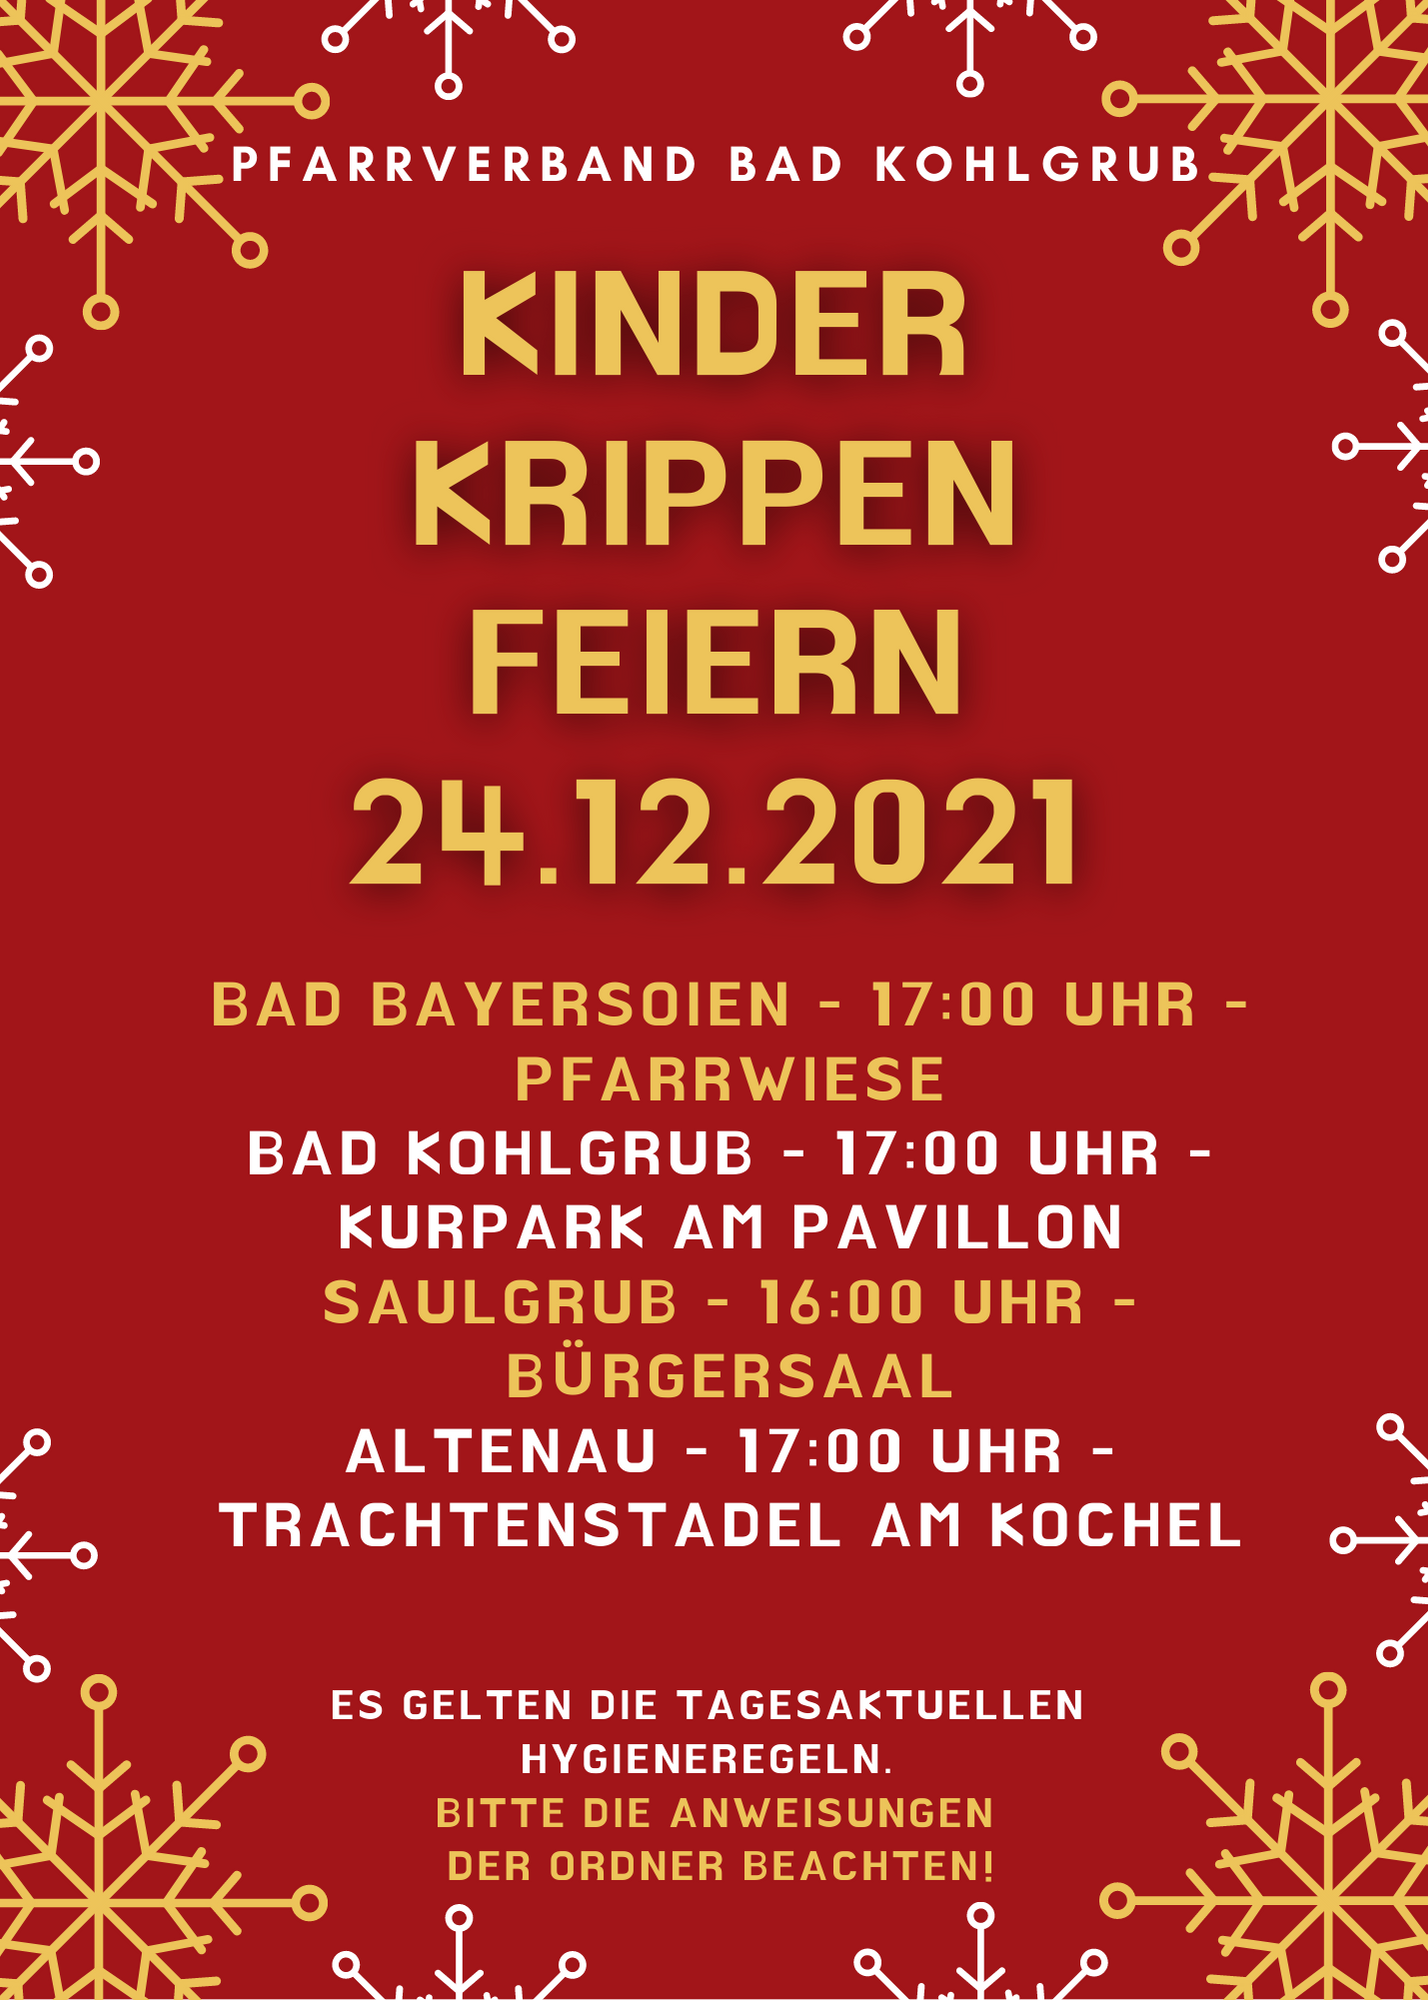 You are currently viewing Kinderkrippenfeiern am 24.12.2021